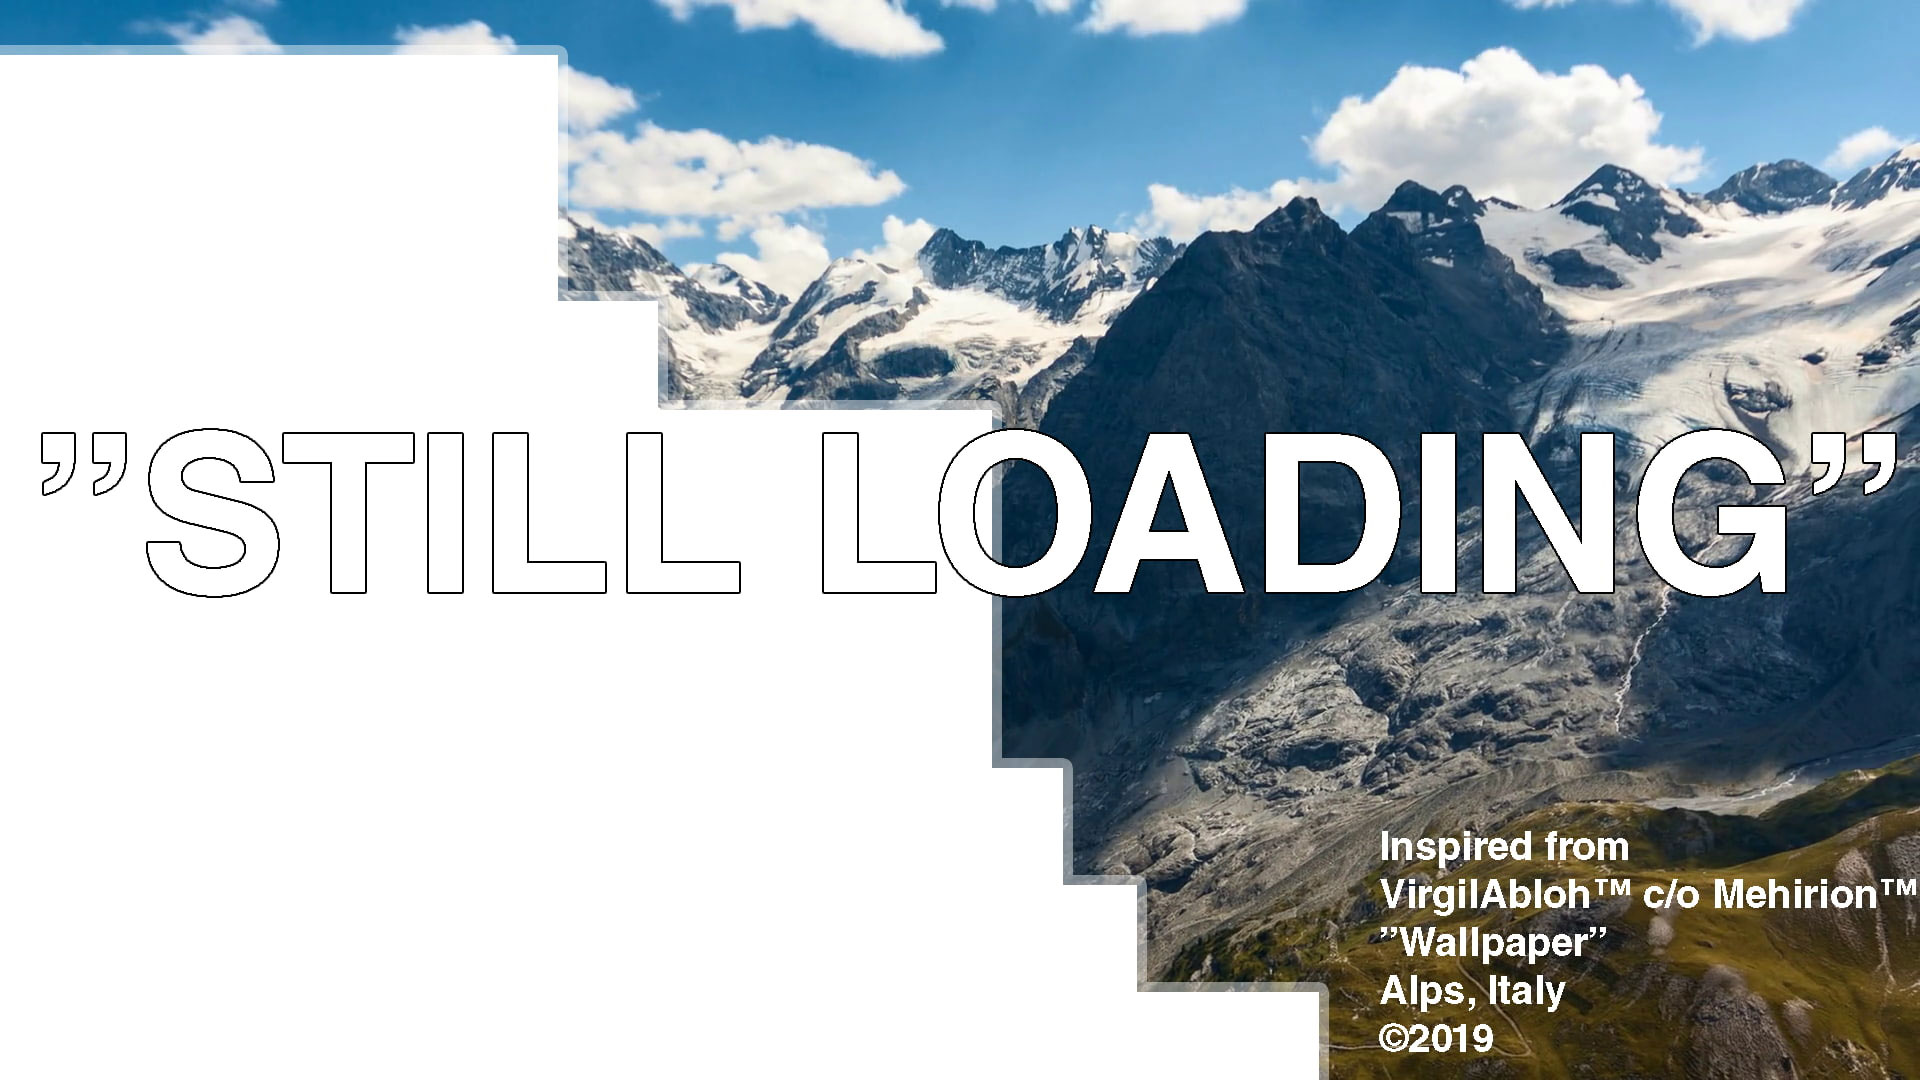 Wallpaper Off White, Mountains, Italy, Alps, Text, alps, Dope